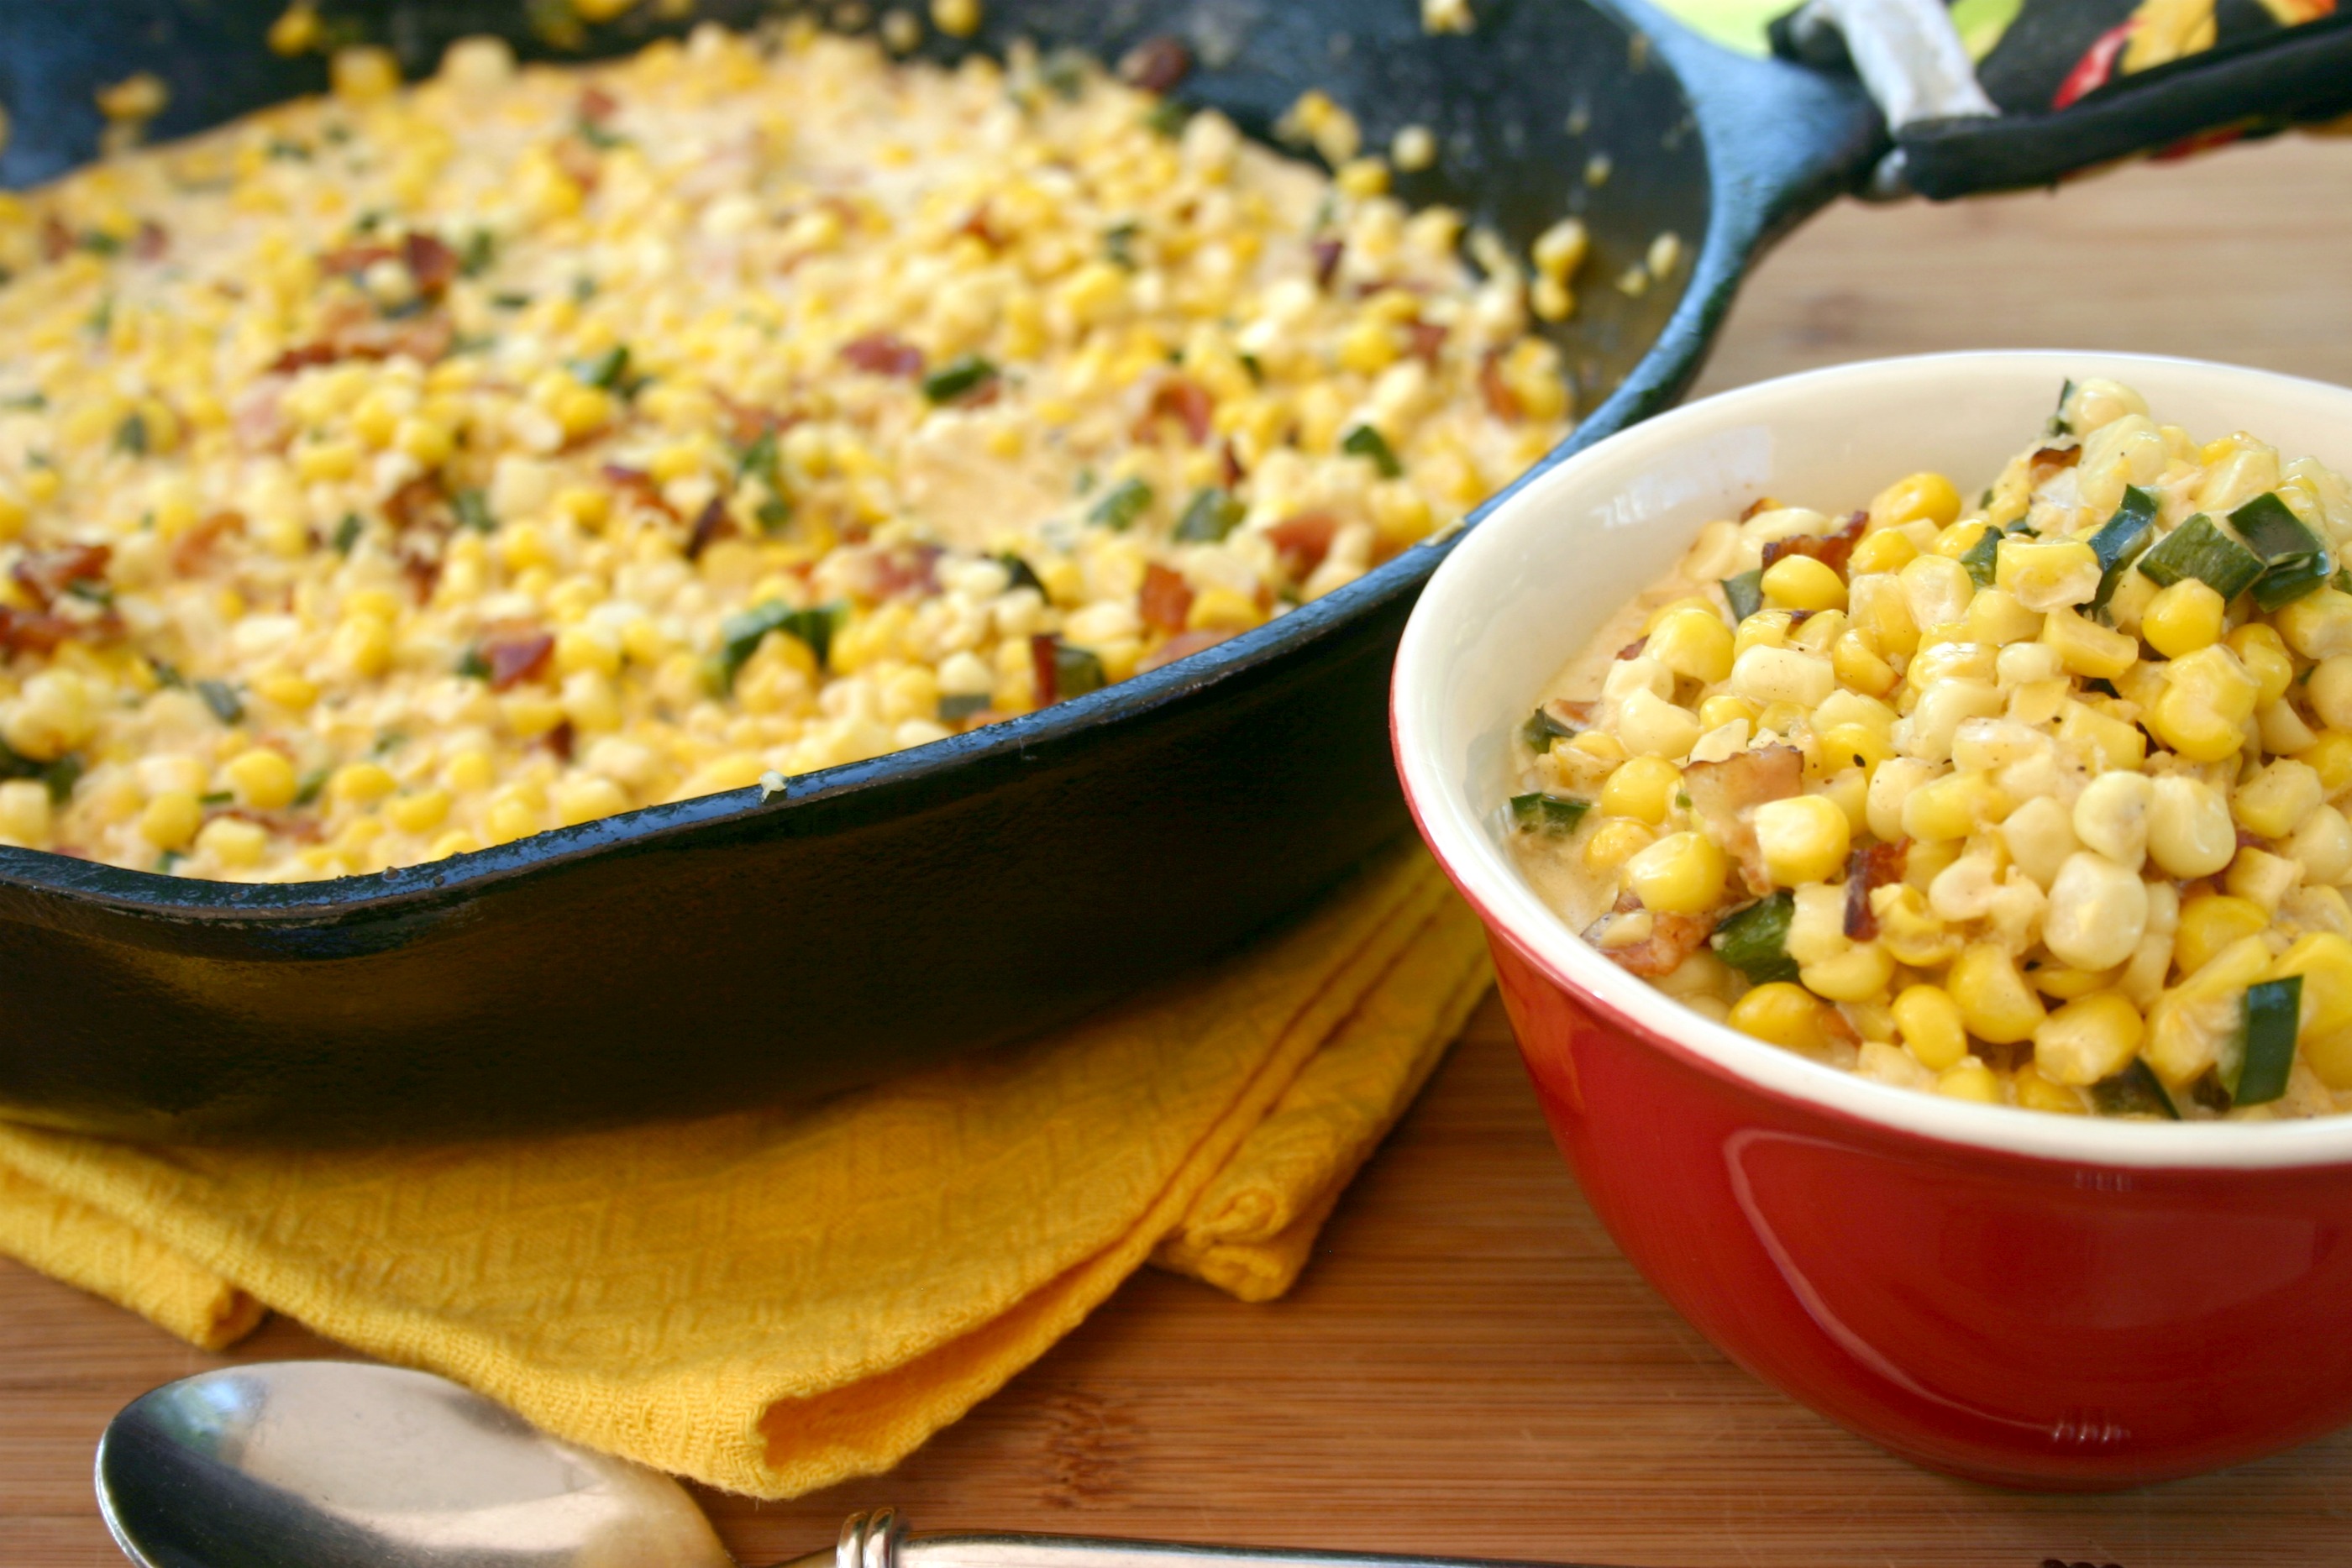 How to make creamed corn